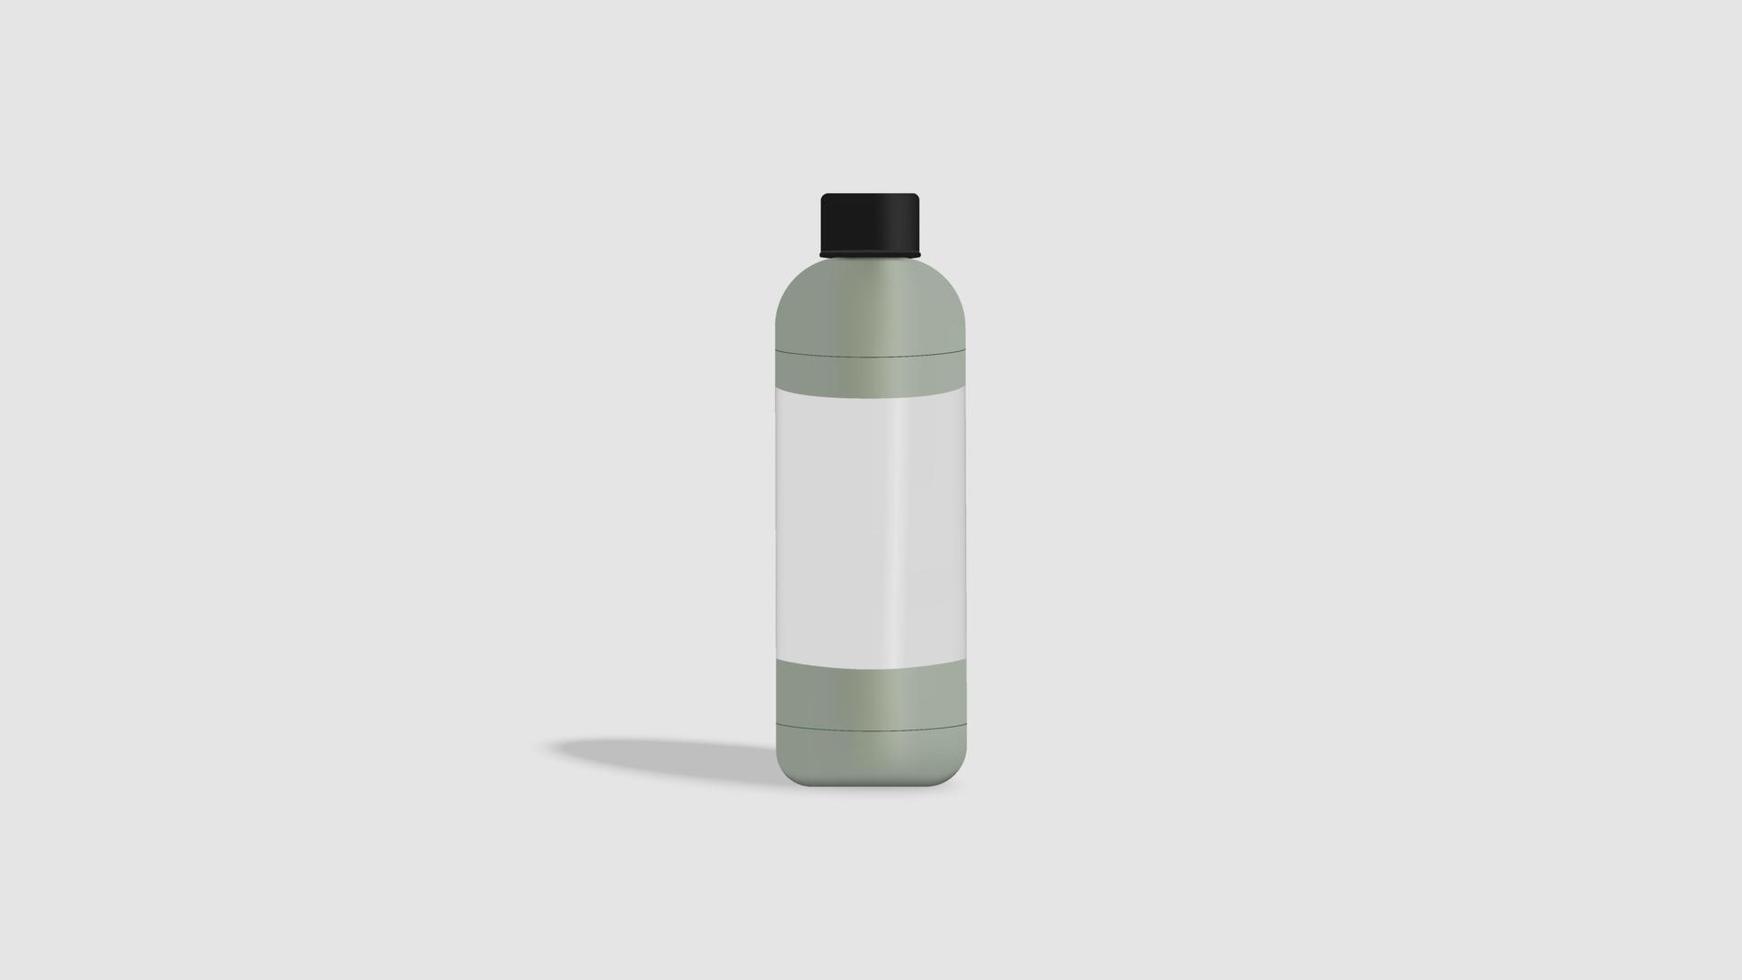 3D Illustration of bottle with black, green, white and grey color scheme. Perfect for any illustration project vector